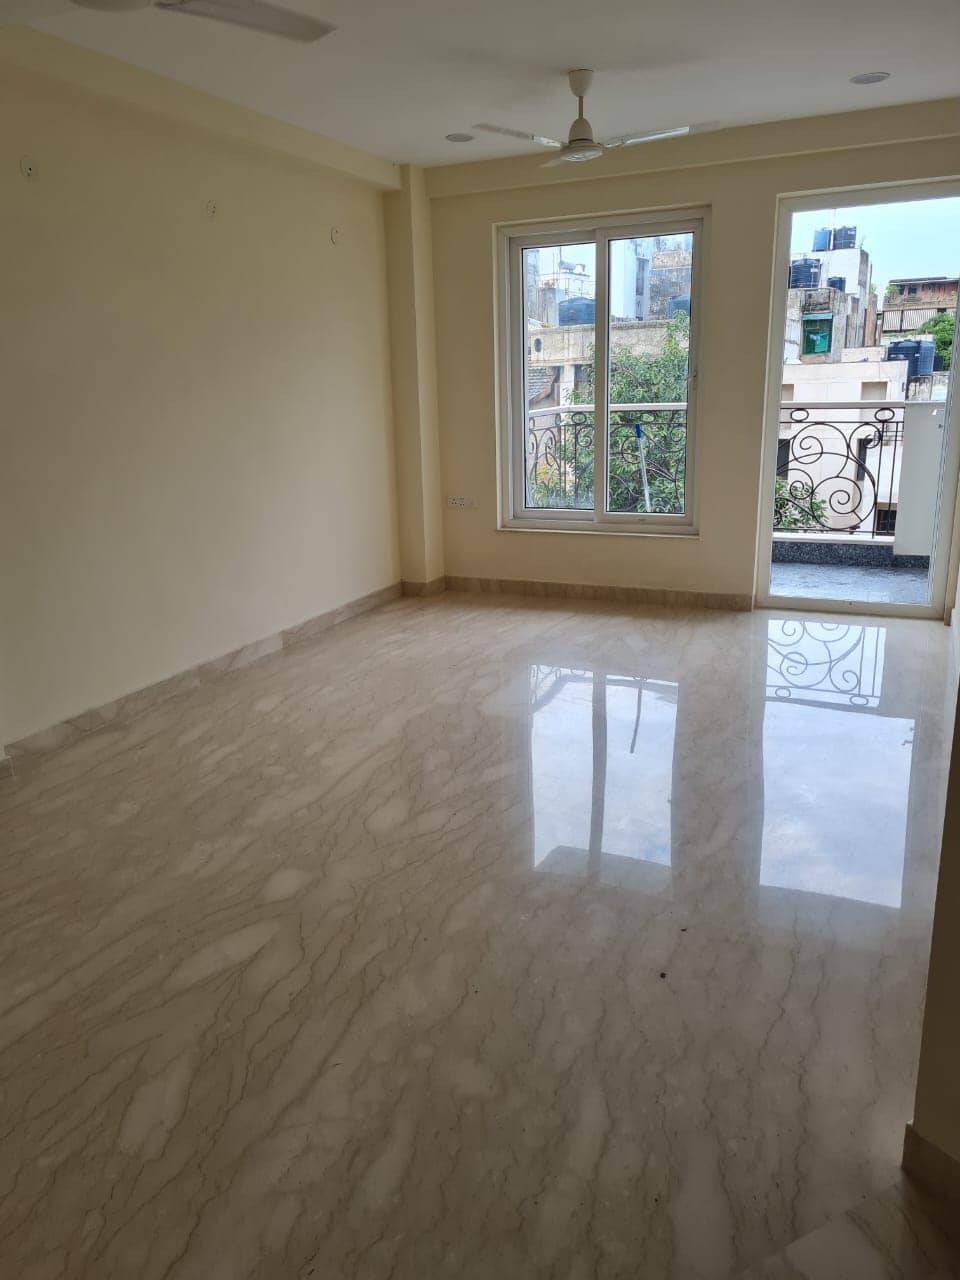 3 Bed/ 3 Bath Rent Apartment/ Flat; 2,700 sq. ft. carpet area, Semi Furnished for rent @Greater Kailash  New delhi